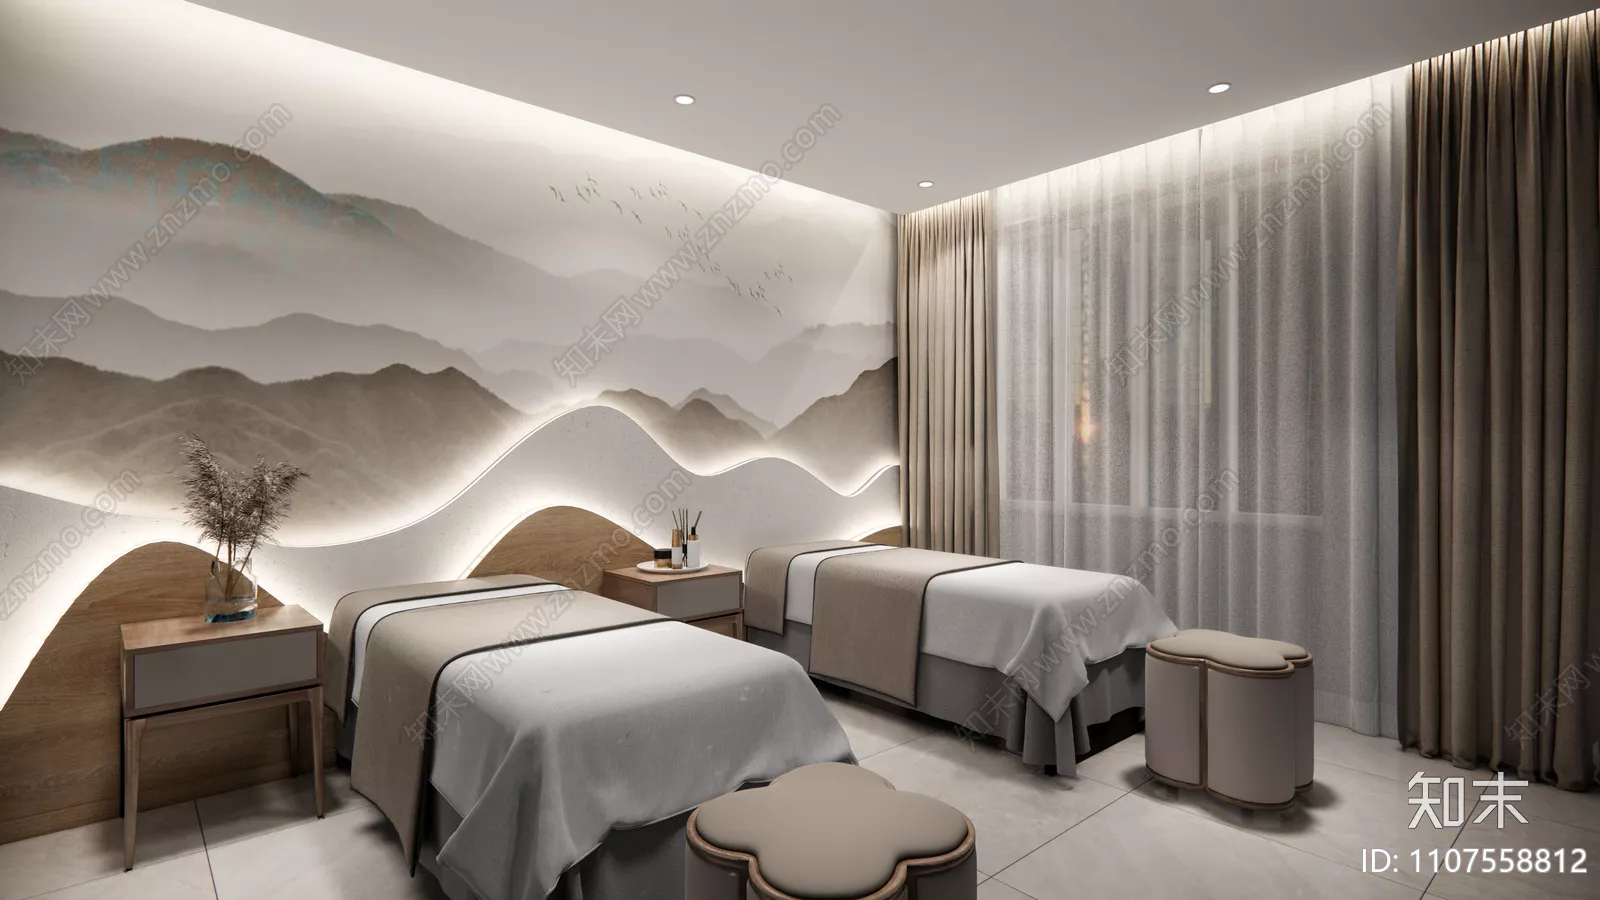 MODERN SPA AND BEAUTY - SKETCHUP 3D SCENE - VRAY OR ENSCAPE - ID14062